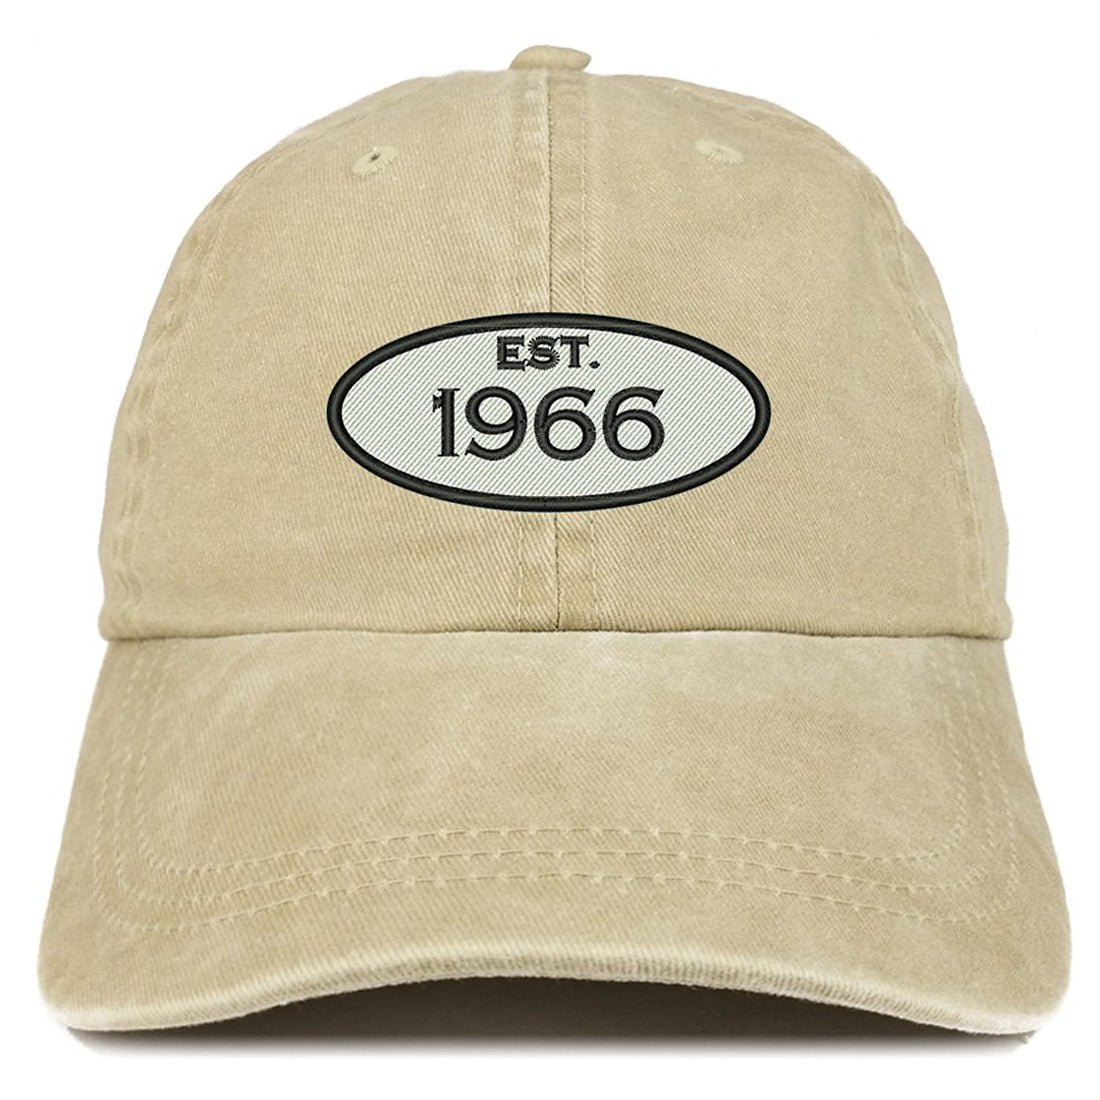 Trendy Apparel Shop Established 1966 Embroidered 53rd Birthday Gift Pigment Dyed Washed Cotton Cap